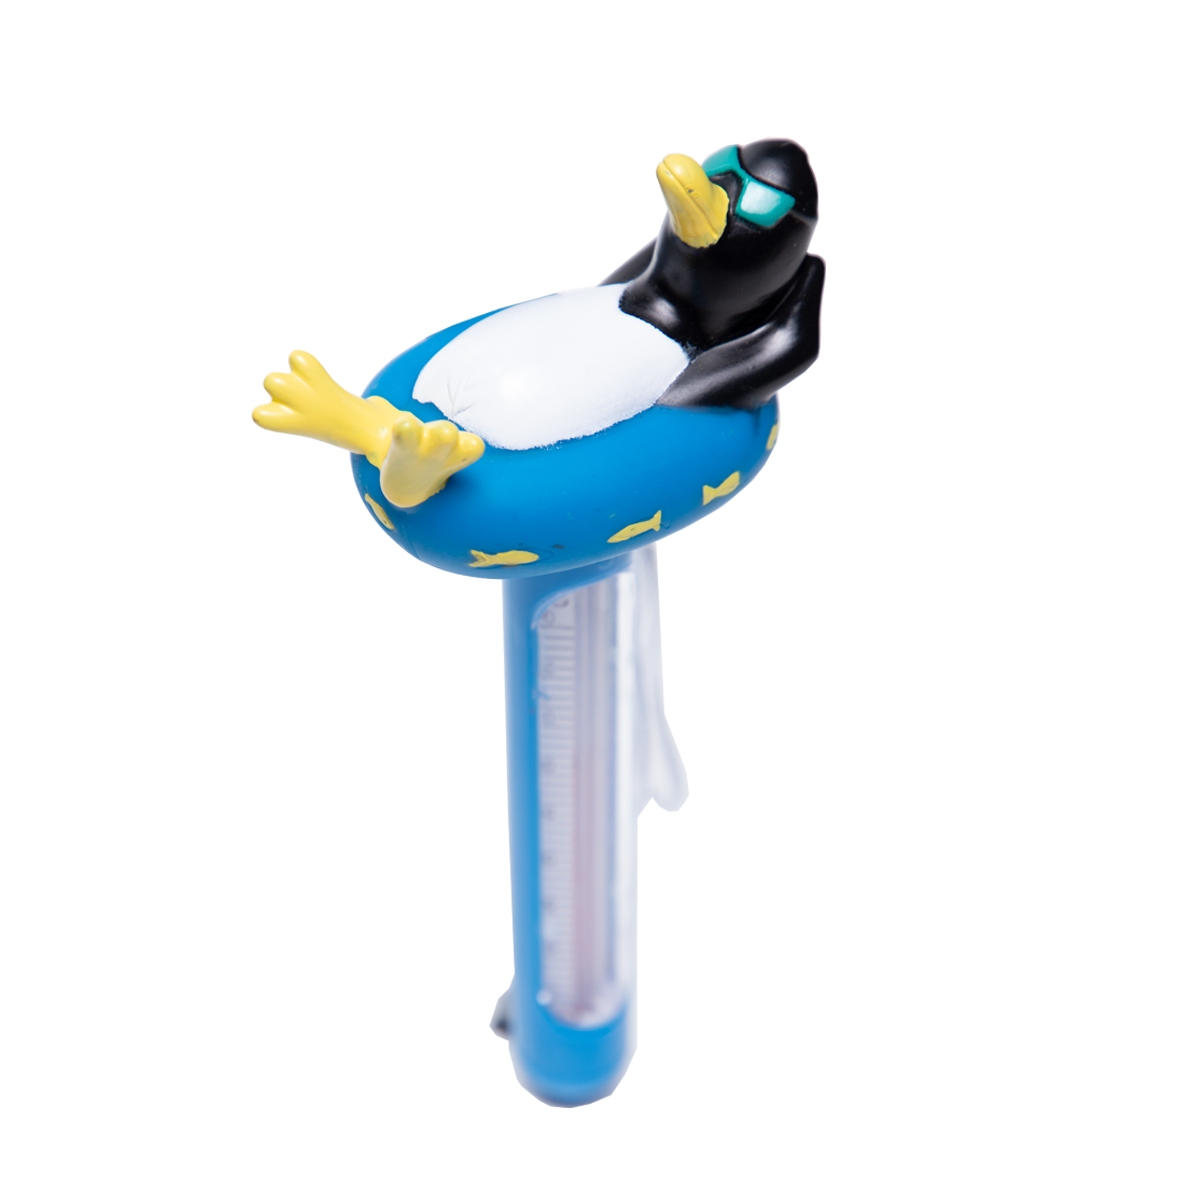 Penguin thermometer